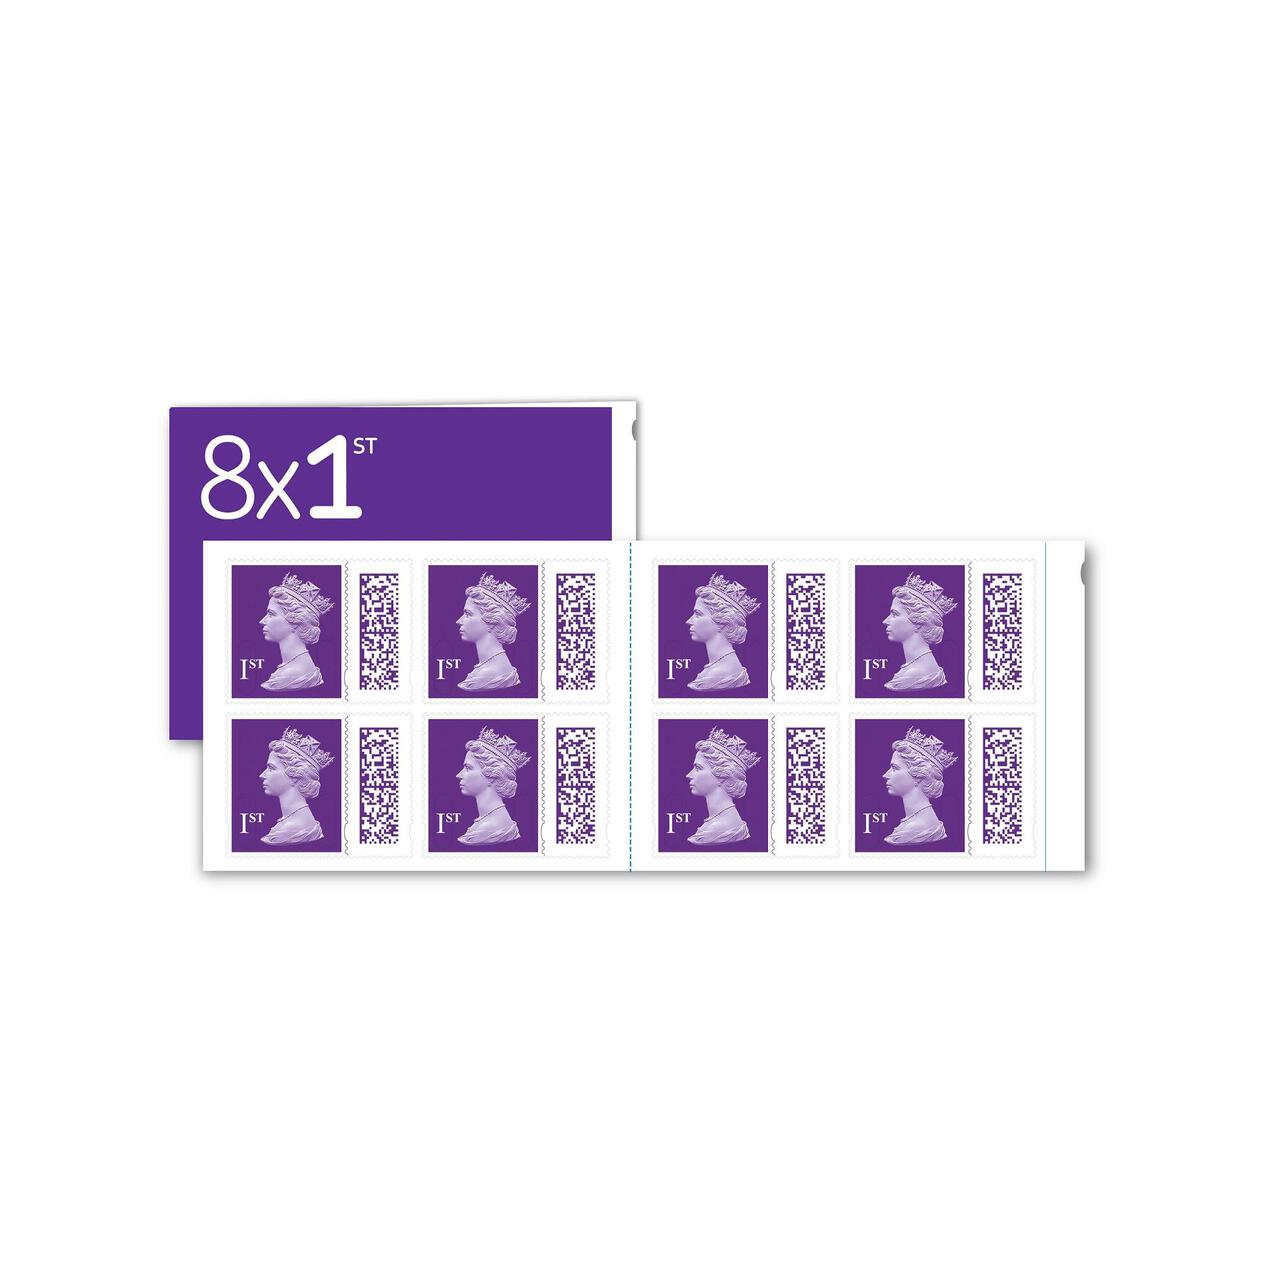 1st Class Stamps 8 per pack